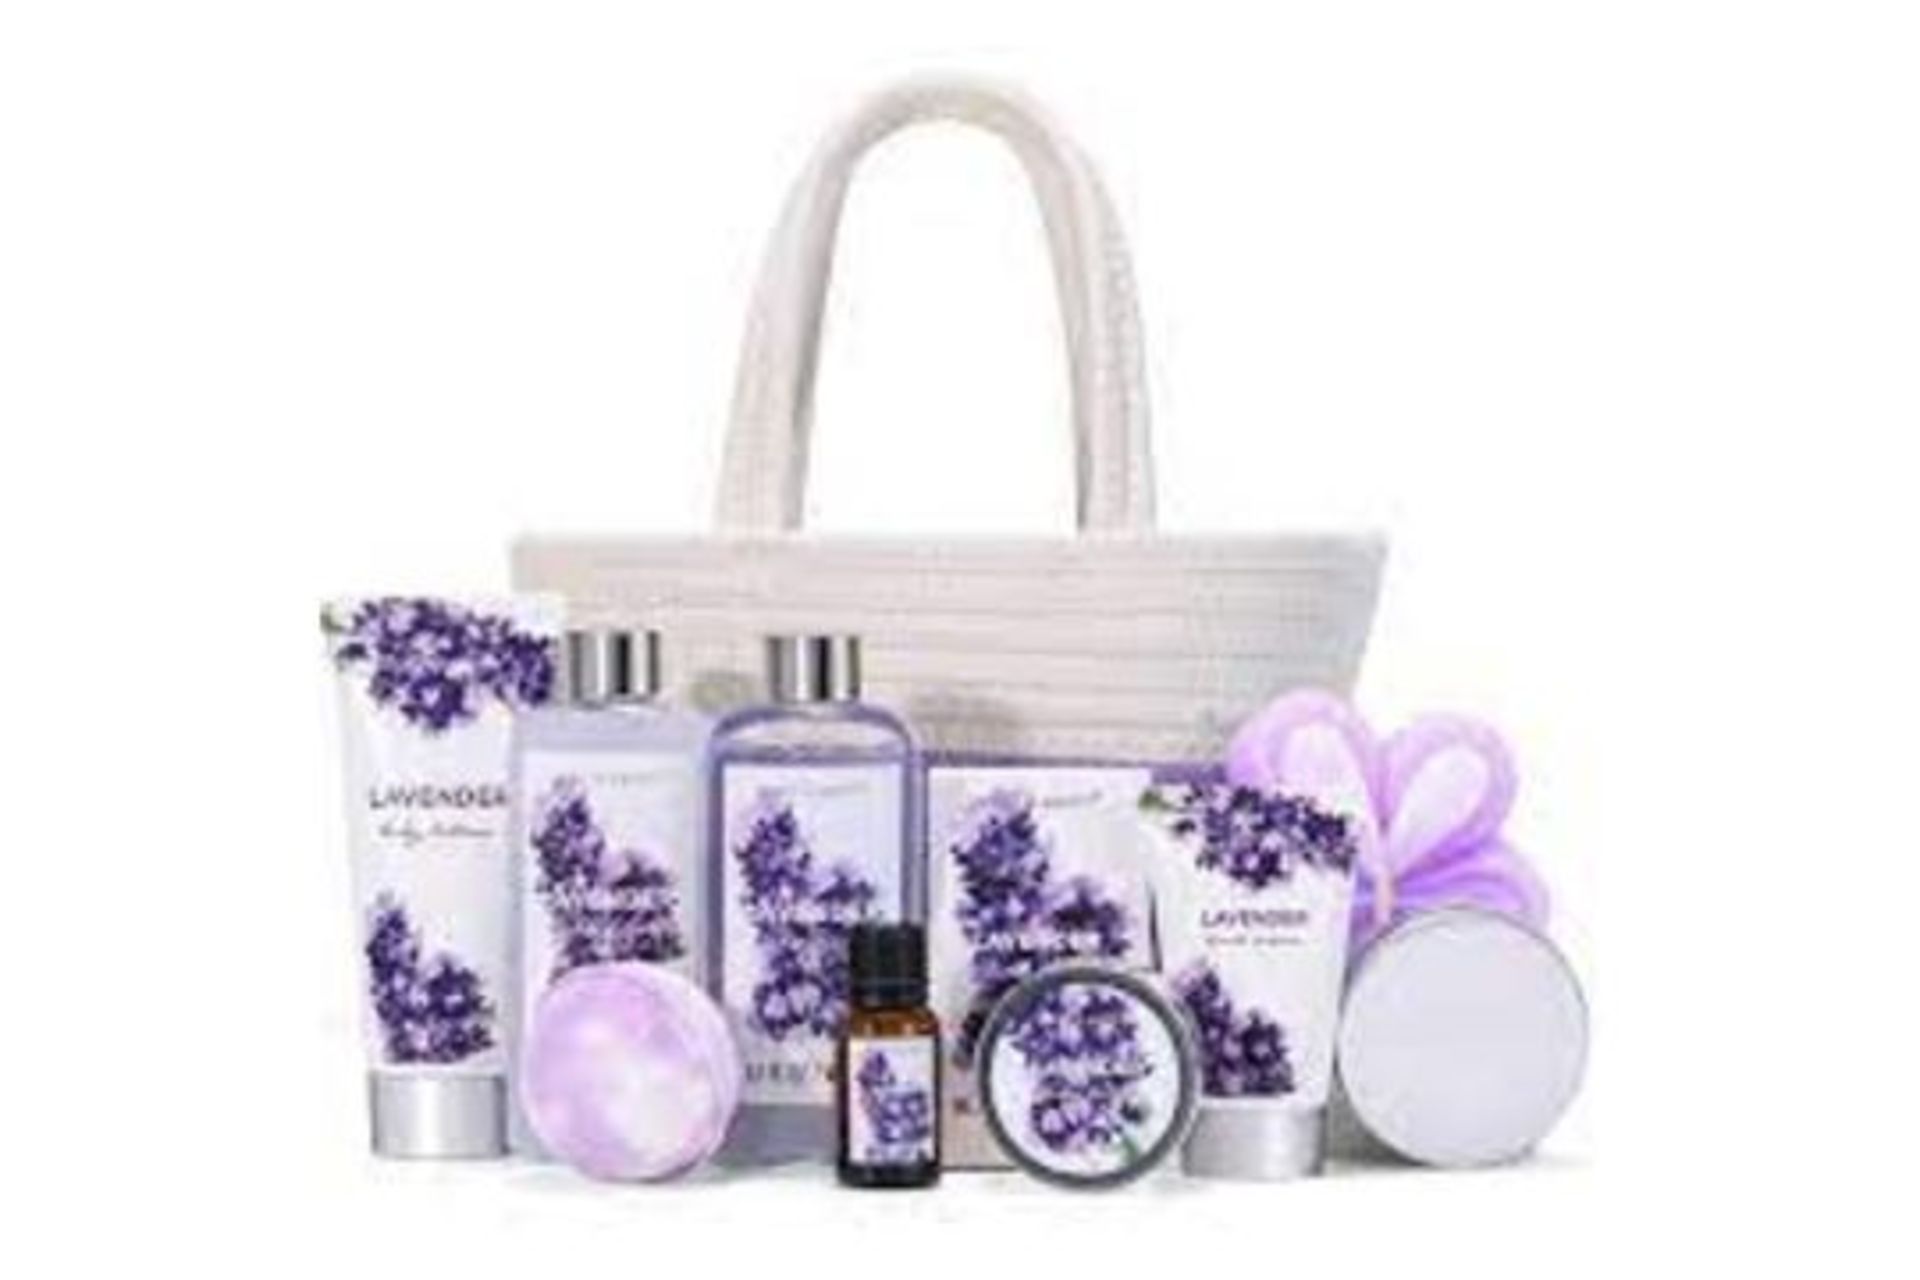 3 X NEW PACKAGED BODY & EARTH Lavender & Honey Spa Bathtub Set. (AMABE-3-1) Contents: This bath